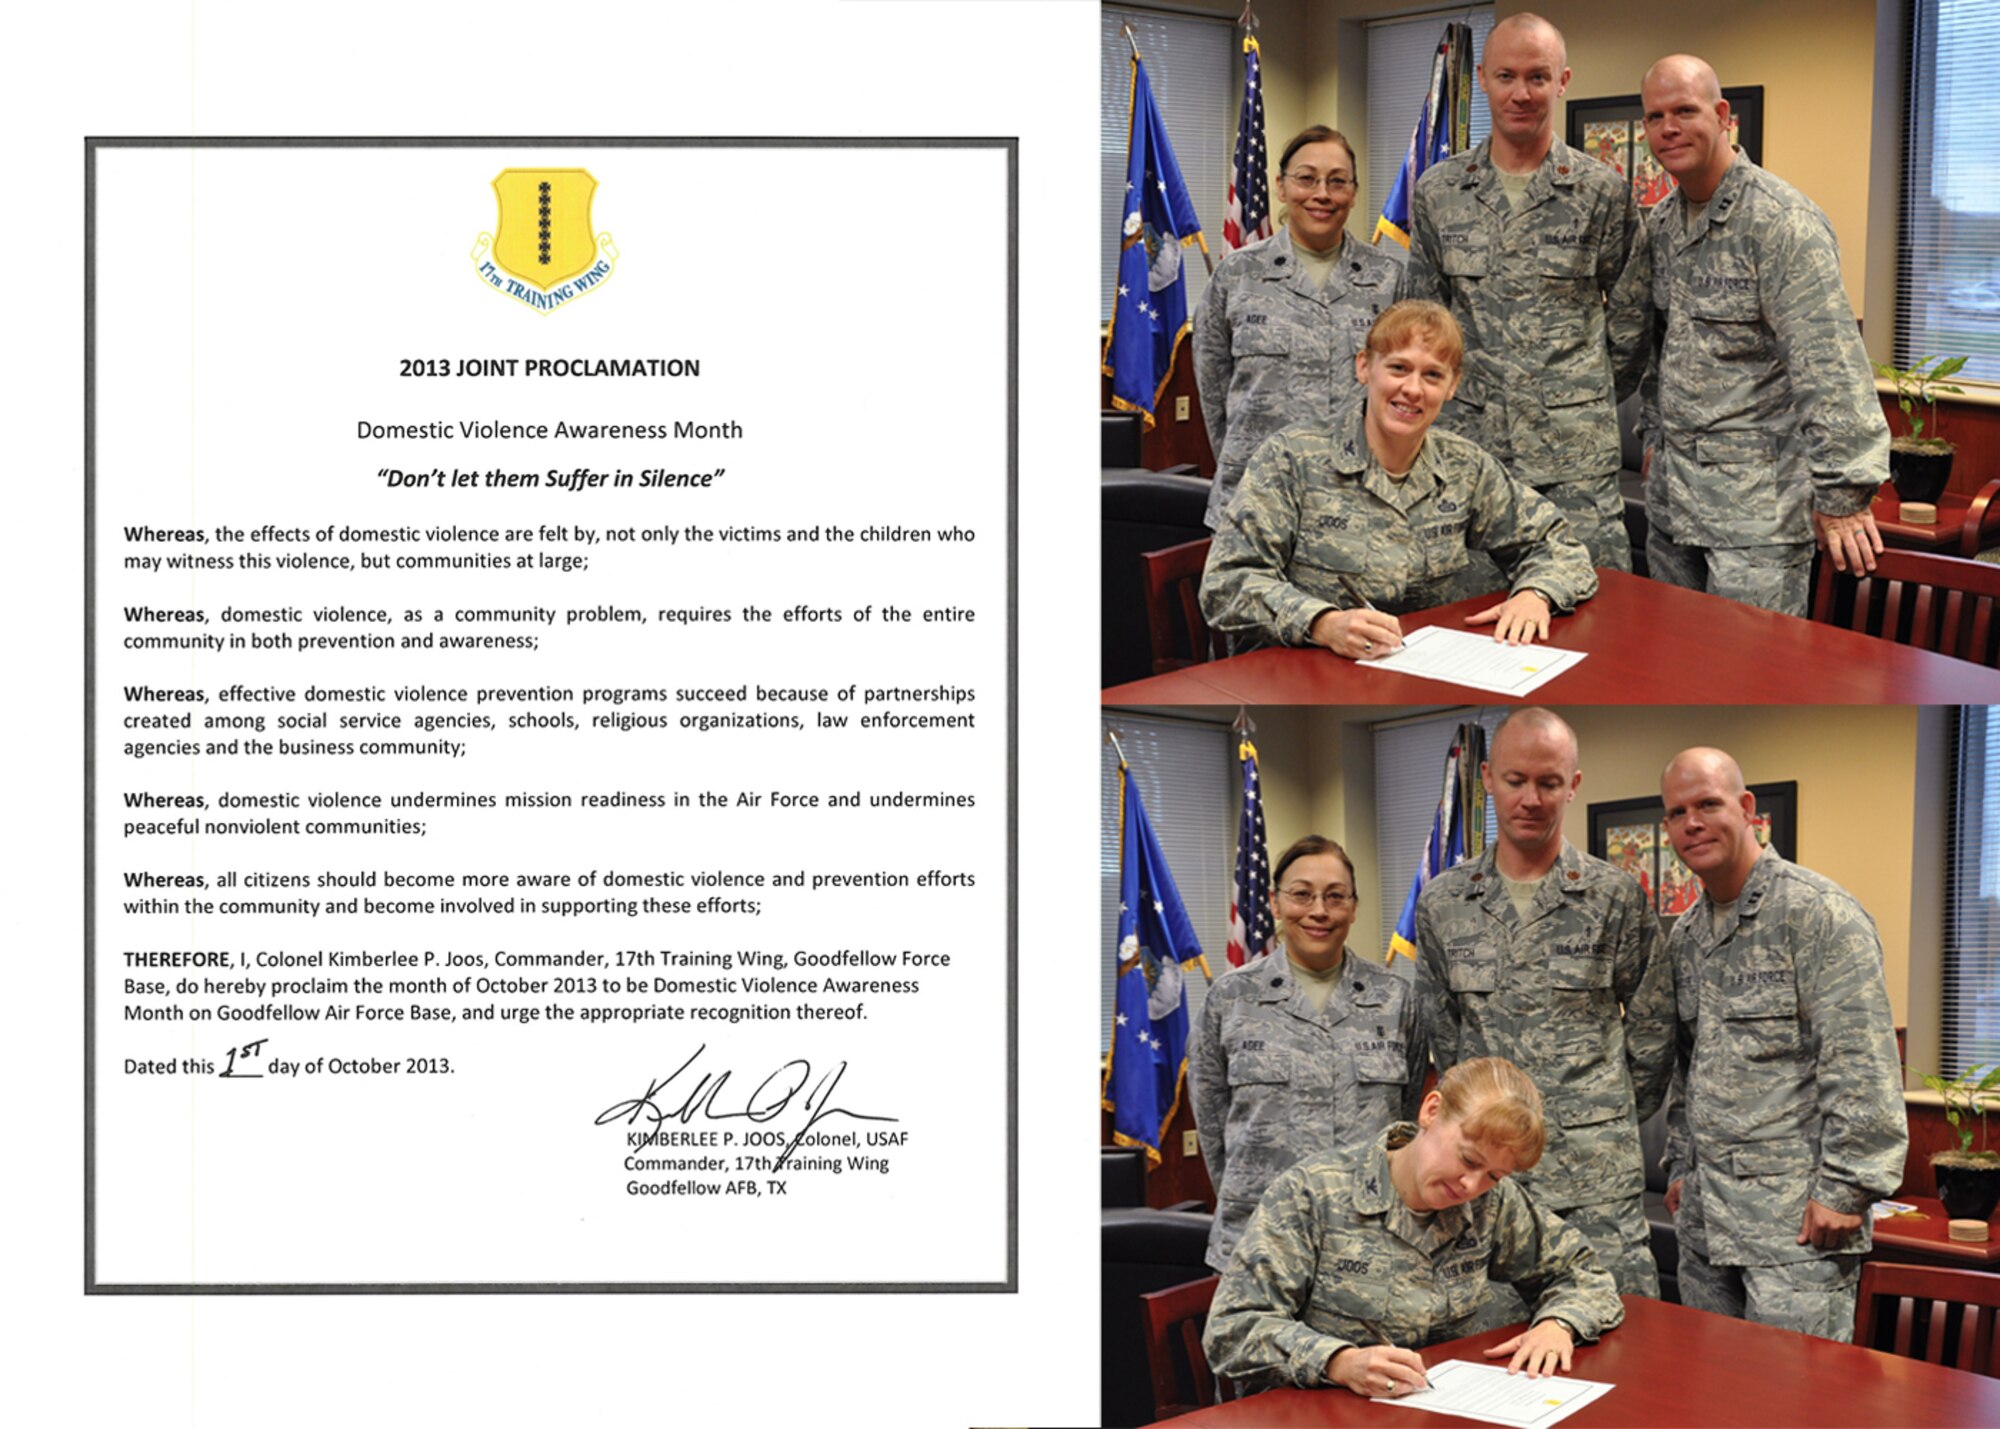 GOODFELLOW AIR FORCE BASE, Texas -- Col. Kimberlee Joos, 17th Training Wing Commander, signs the 2013 Joint Proclamation Letter for Domestic Violence Awareness month Oct. 2. The letter proclaims October to be Domestic Violence Awareness and Prevention month at Goodfellow. (U.S. Air Force illustration by Airman 1st Class Erica Rodriguez